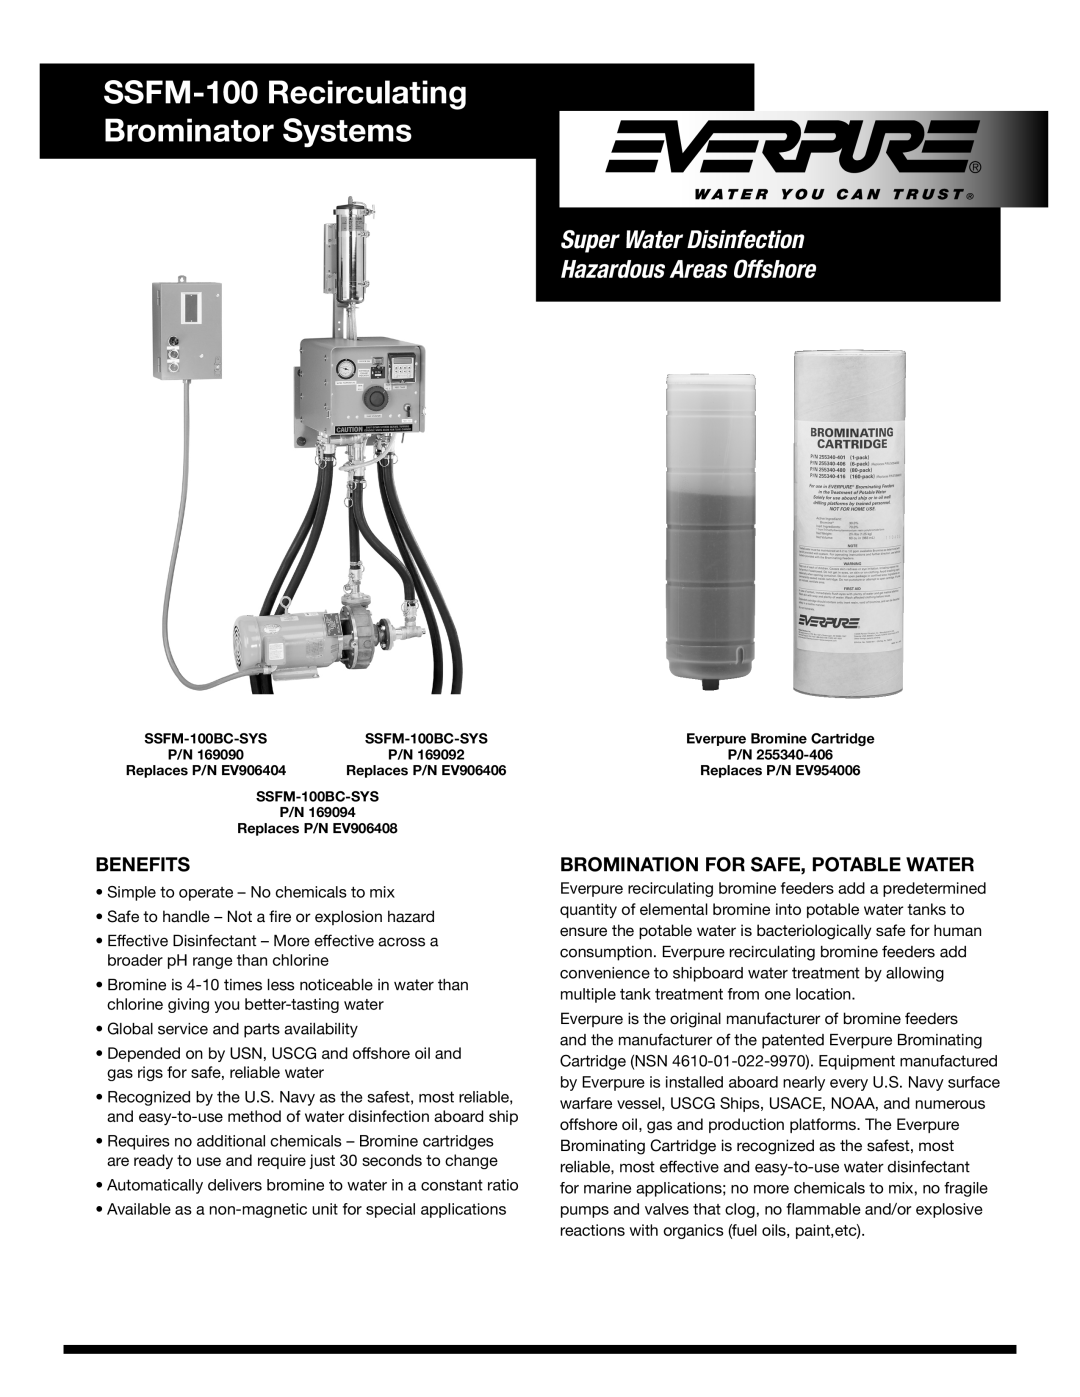 Everpure SSFM-100BC-SYS manual SSFM-100 Recirculating Brominator Systems, Benefits, Bromination For Safe, Potable Water 